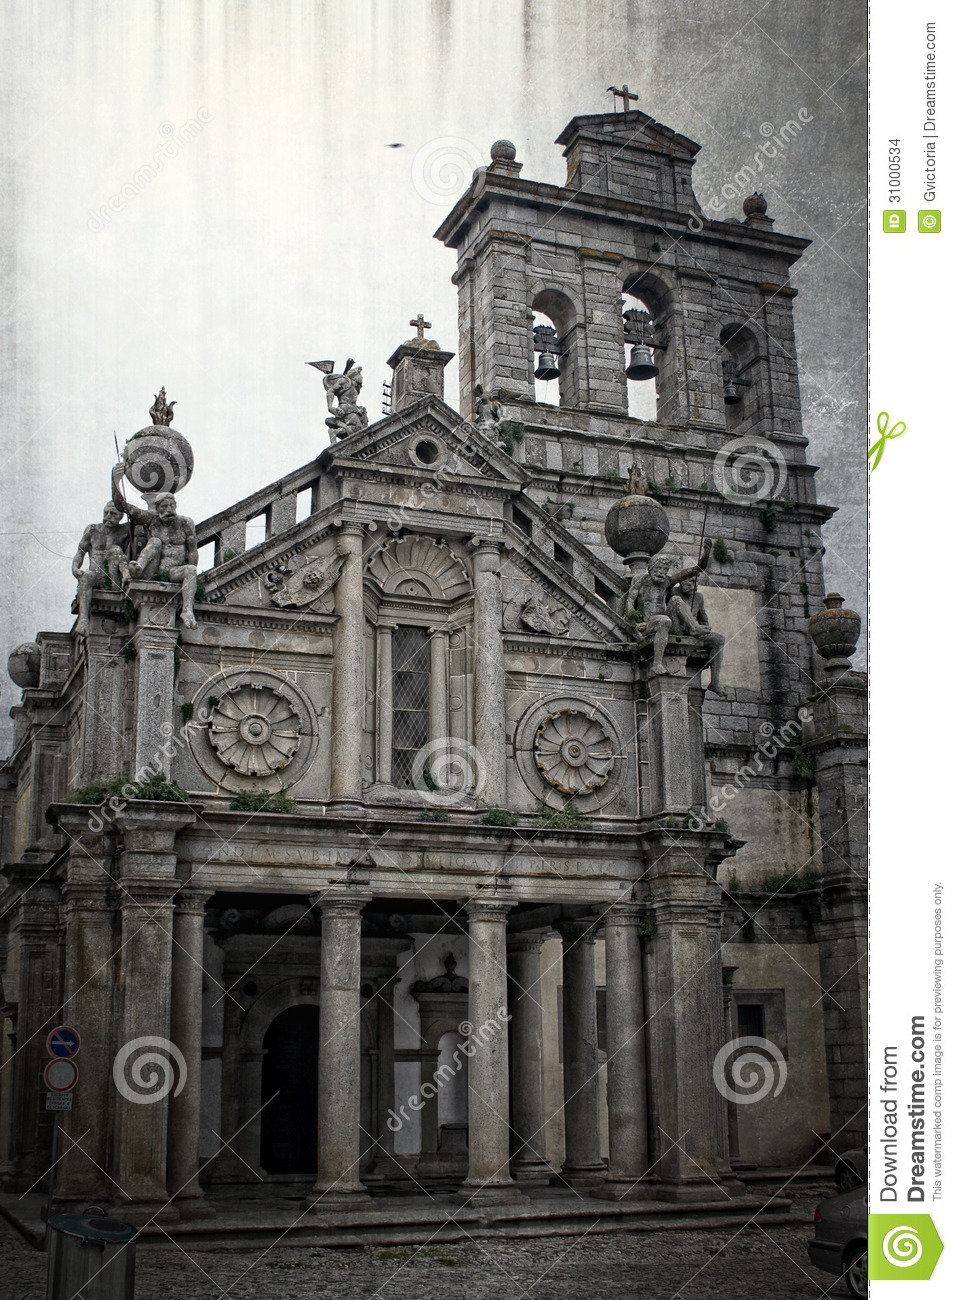     Church With Ornate Statues And Tower With 3 Bells With Gothic Look